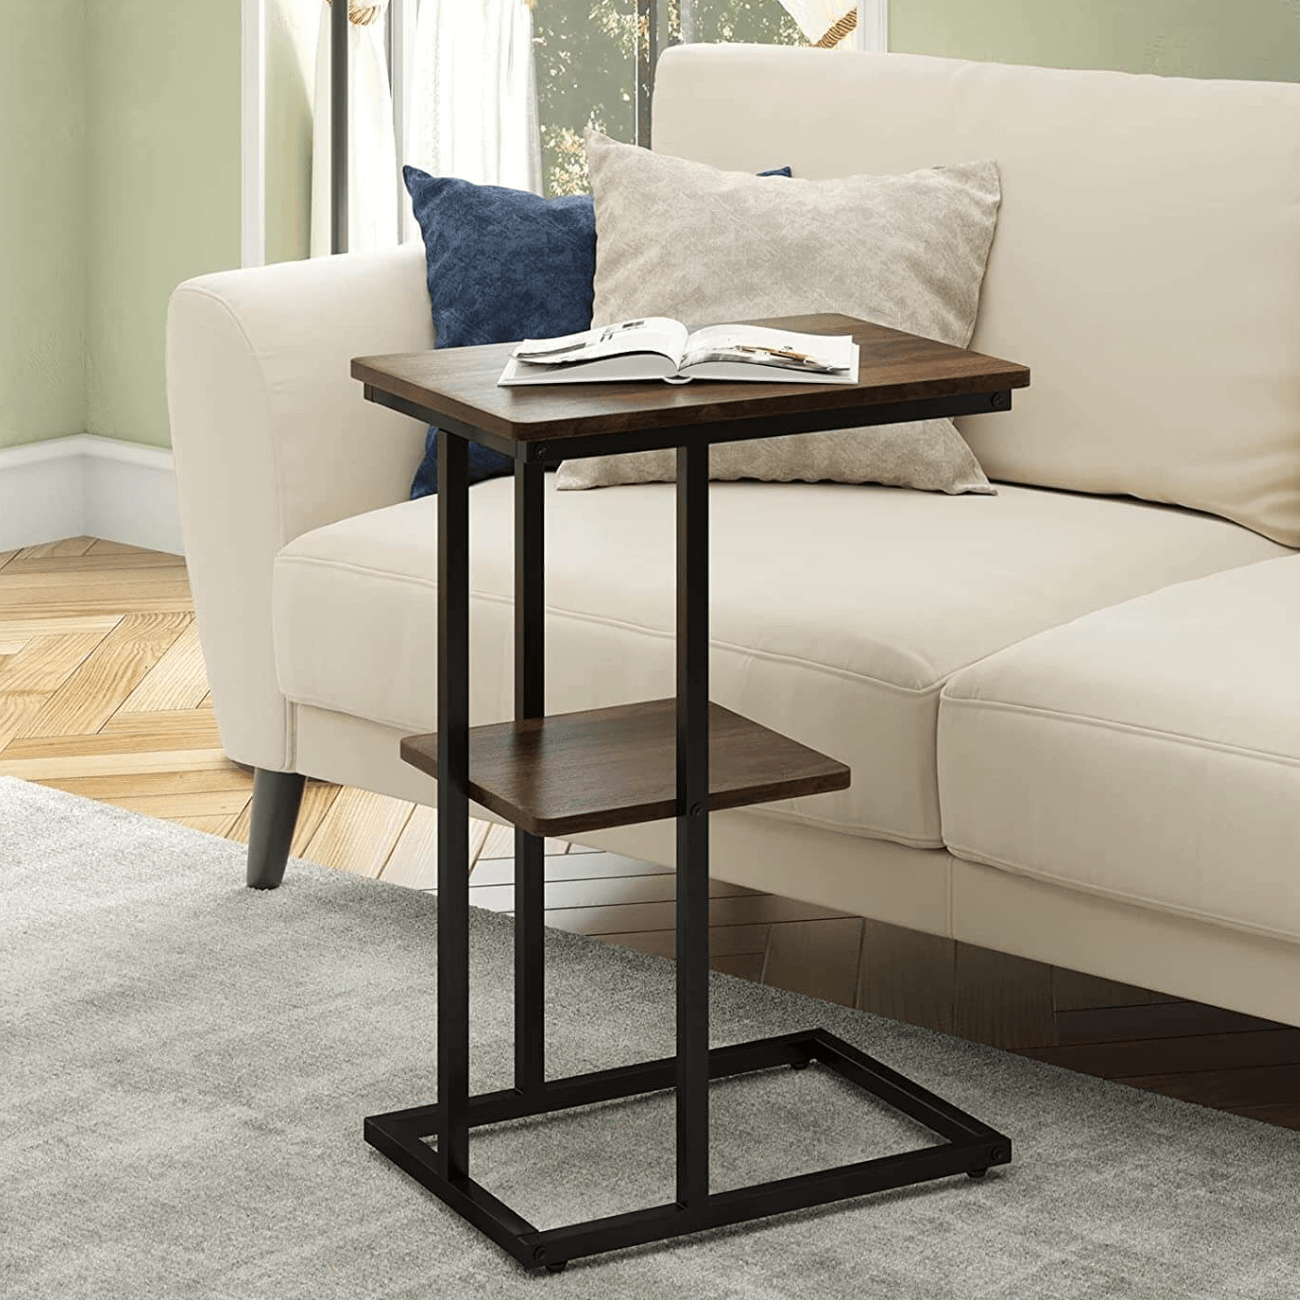 C Shaped Side Table - Stylish & Versatile Accents